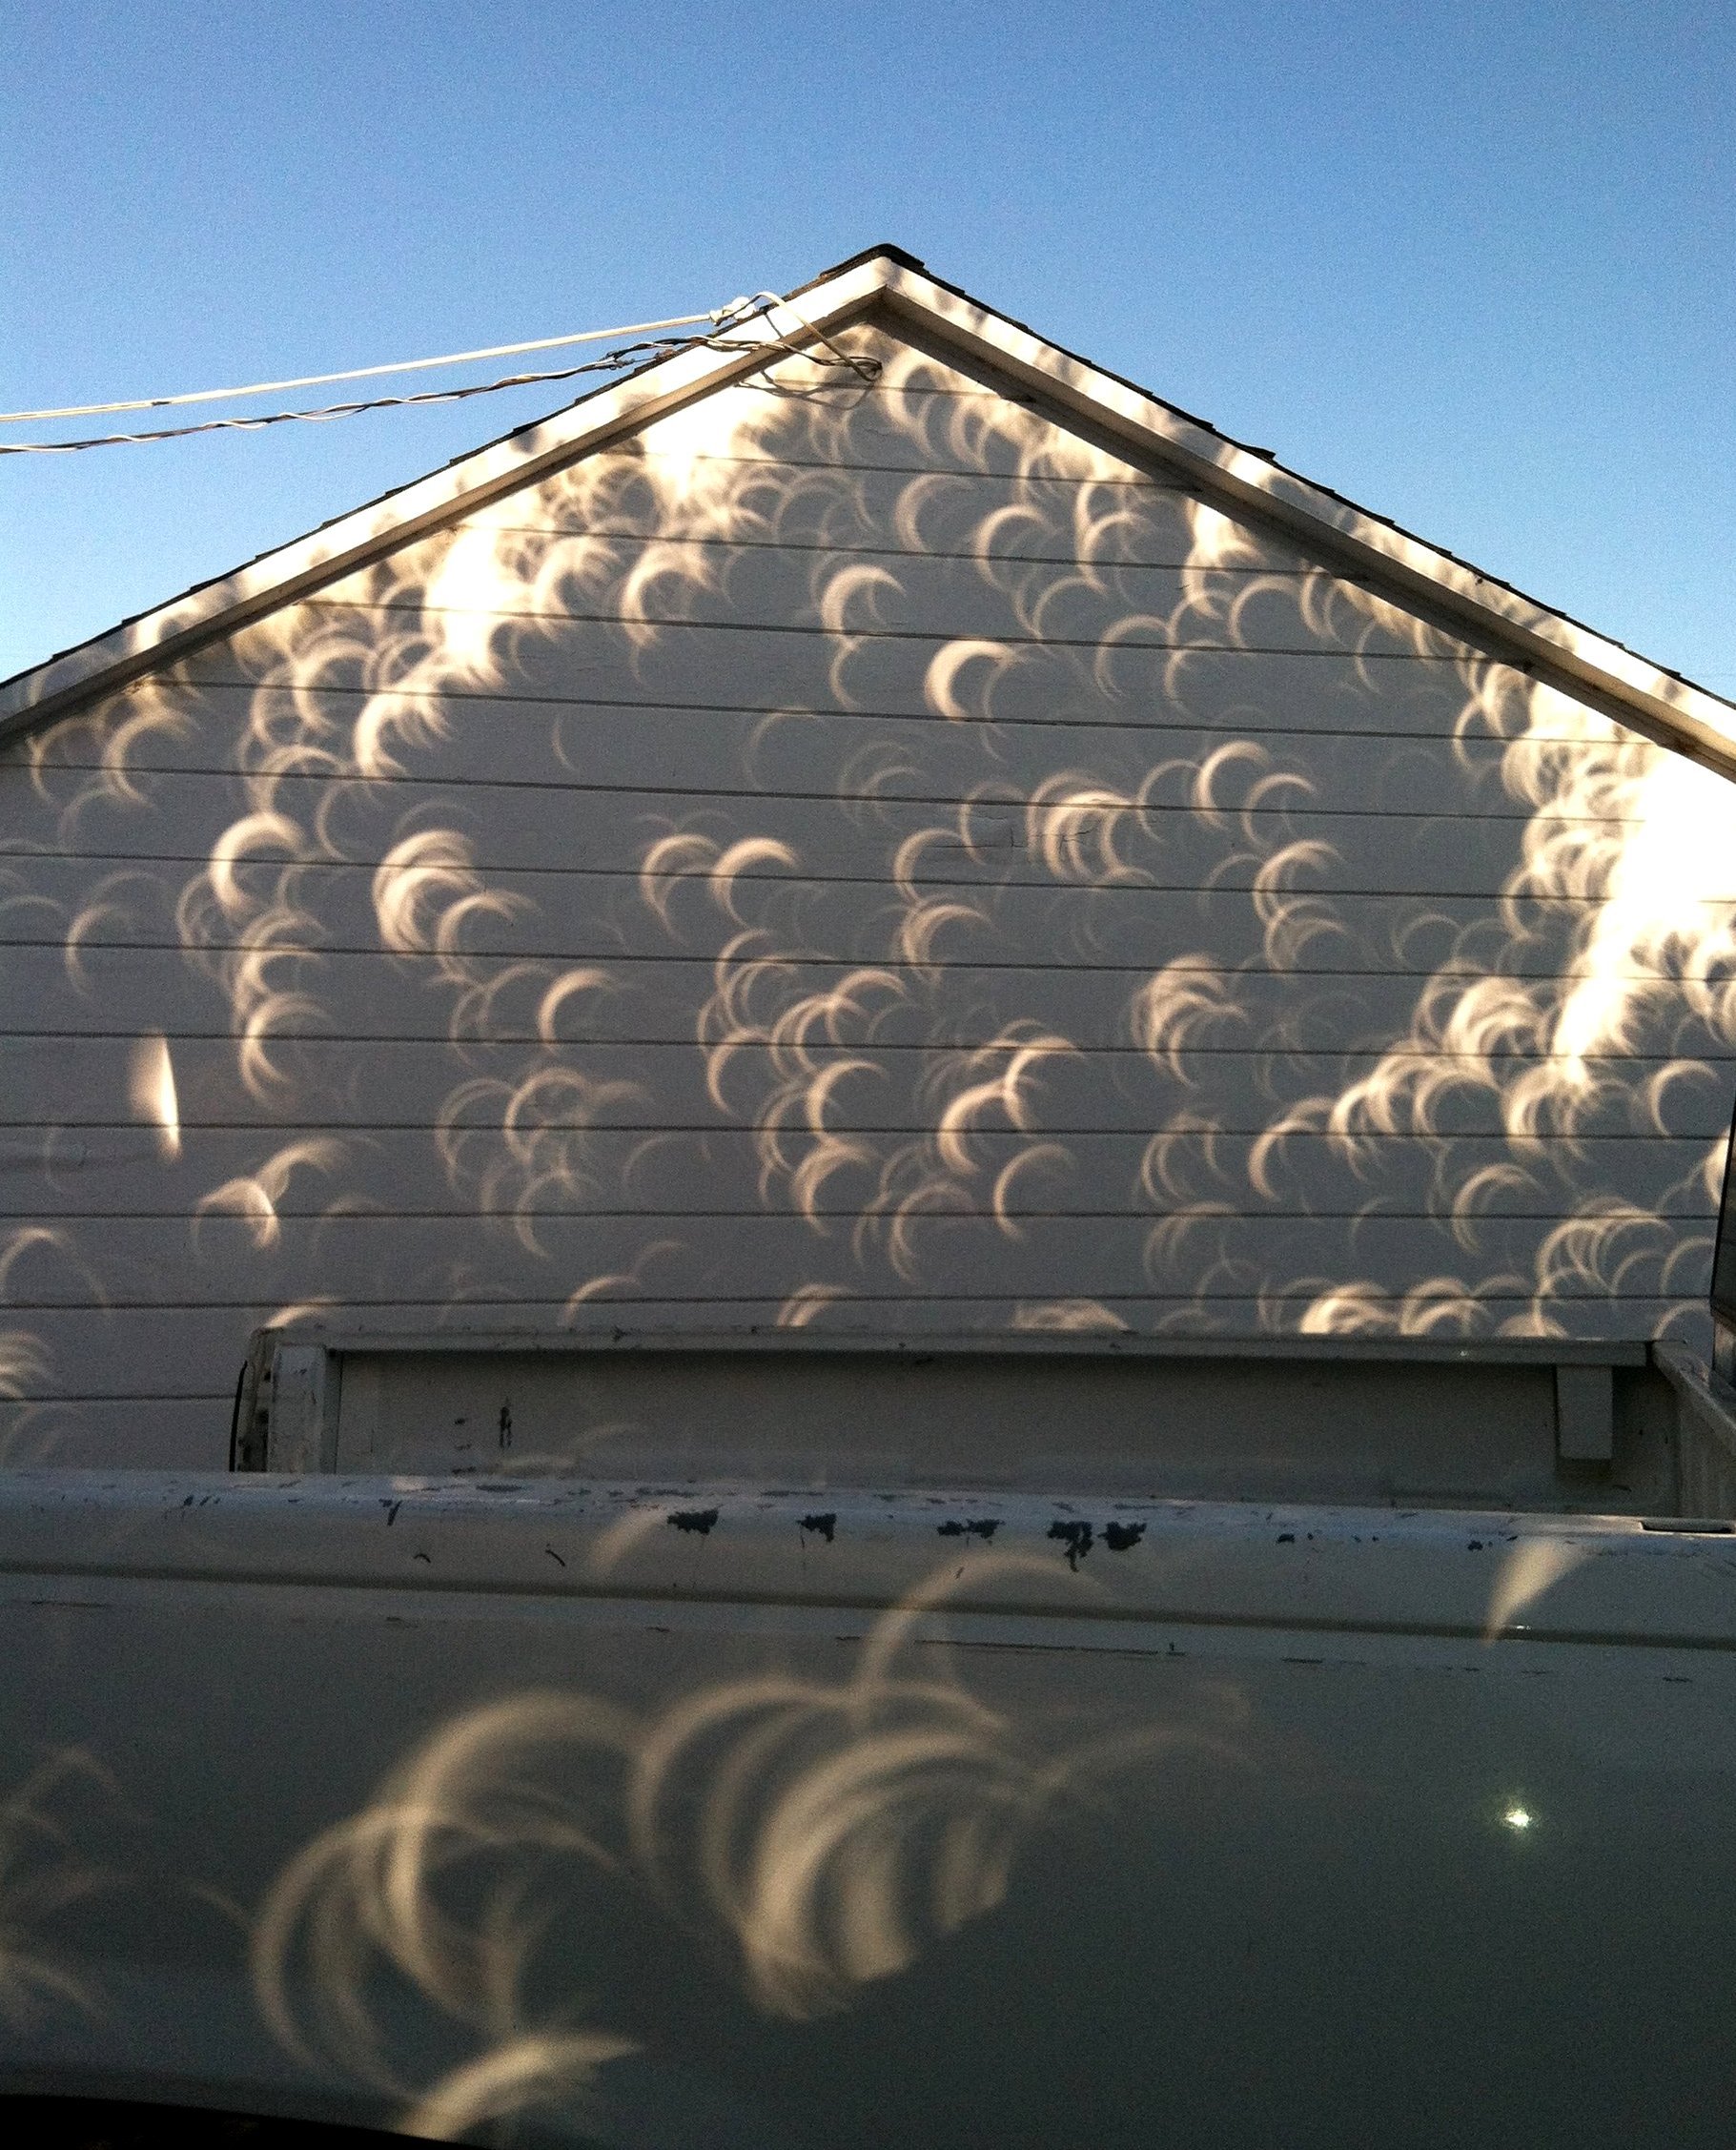 This is what the shadow of a tree looks like during an eclipse.